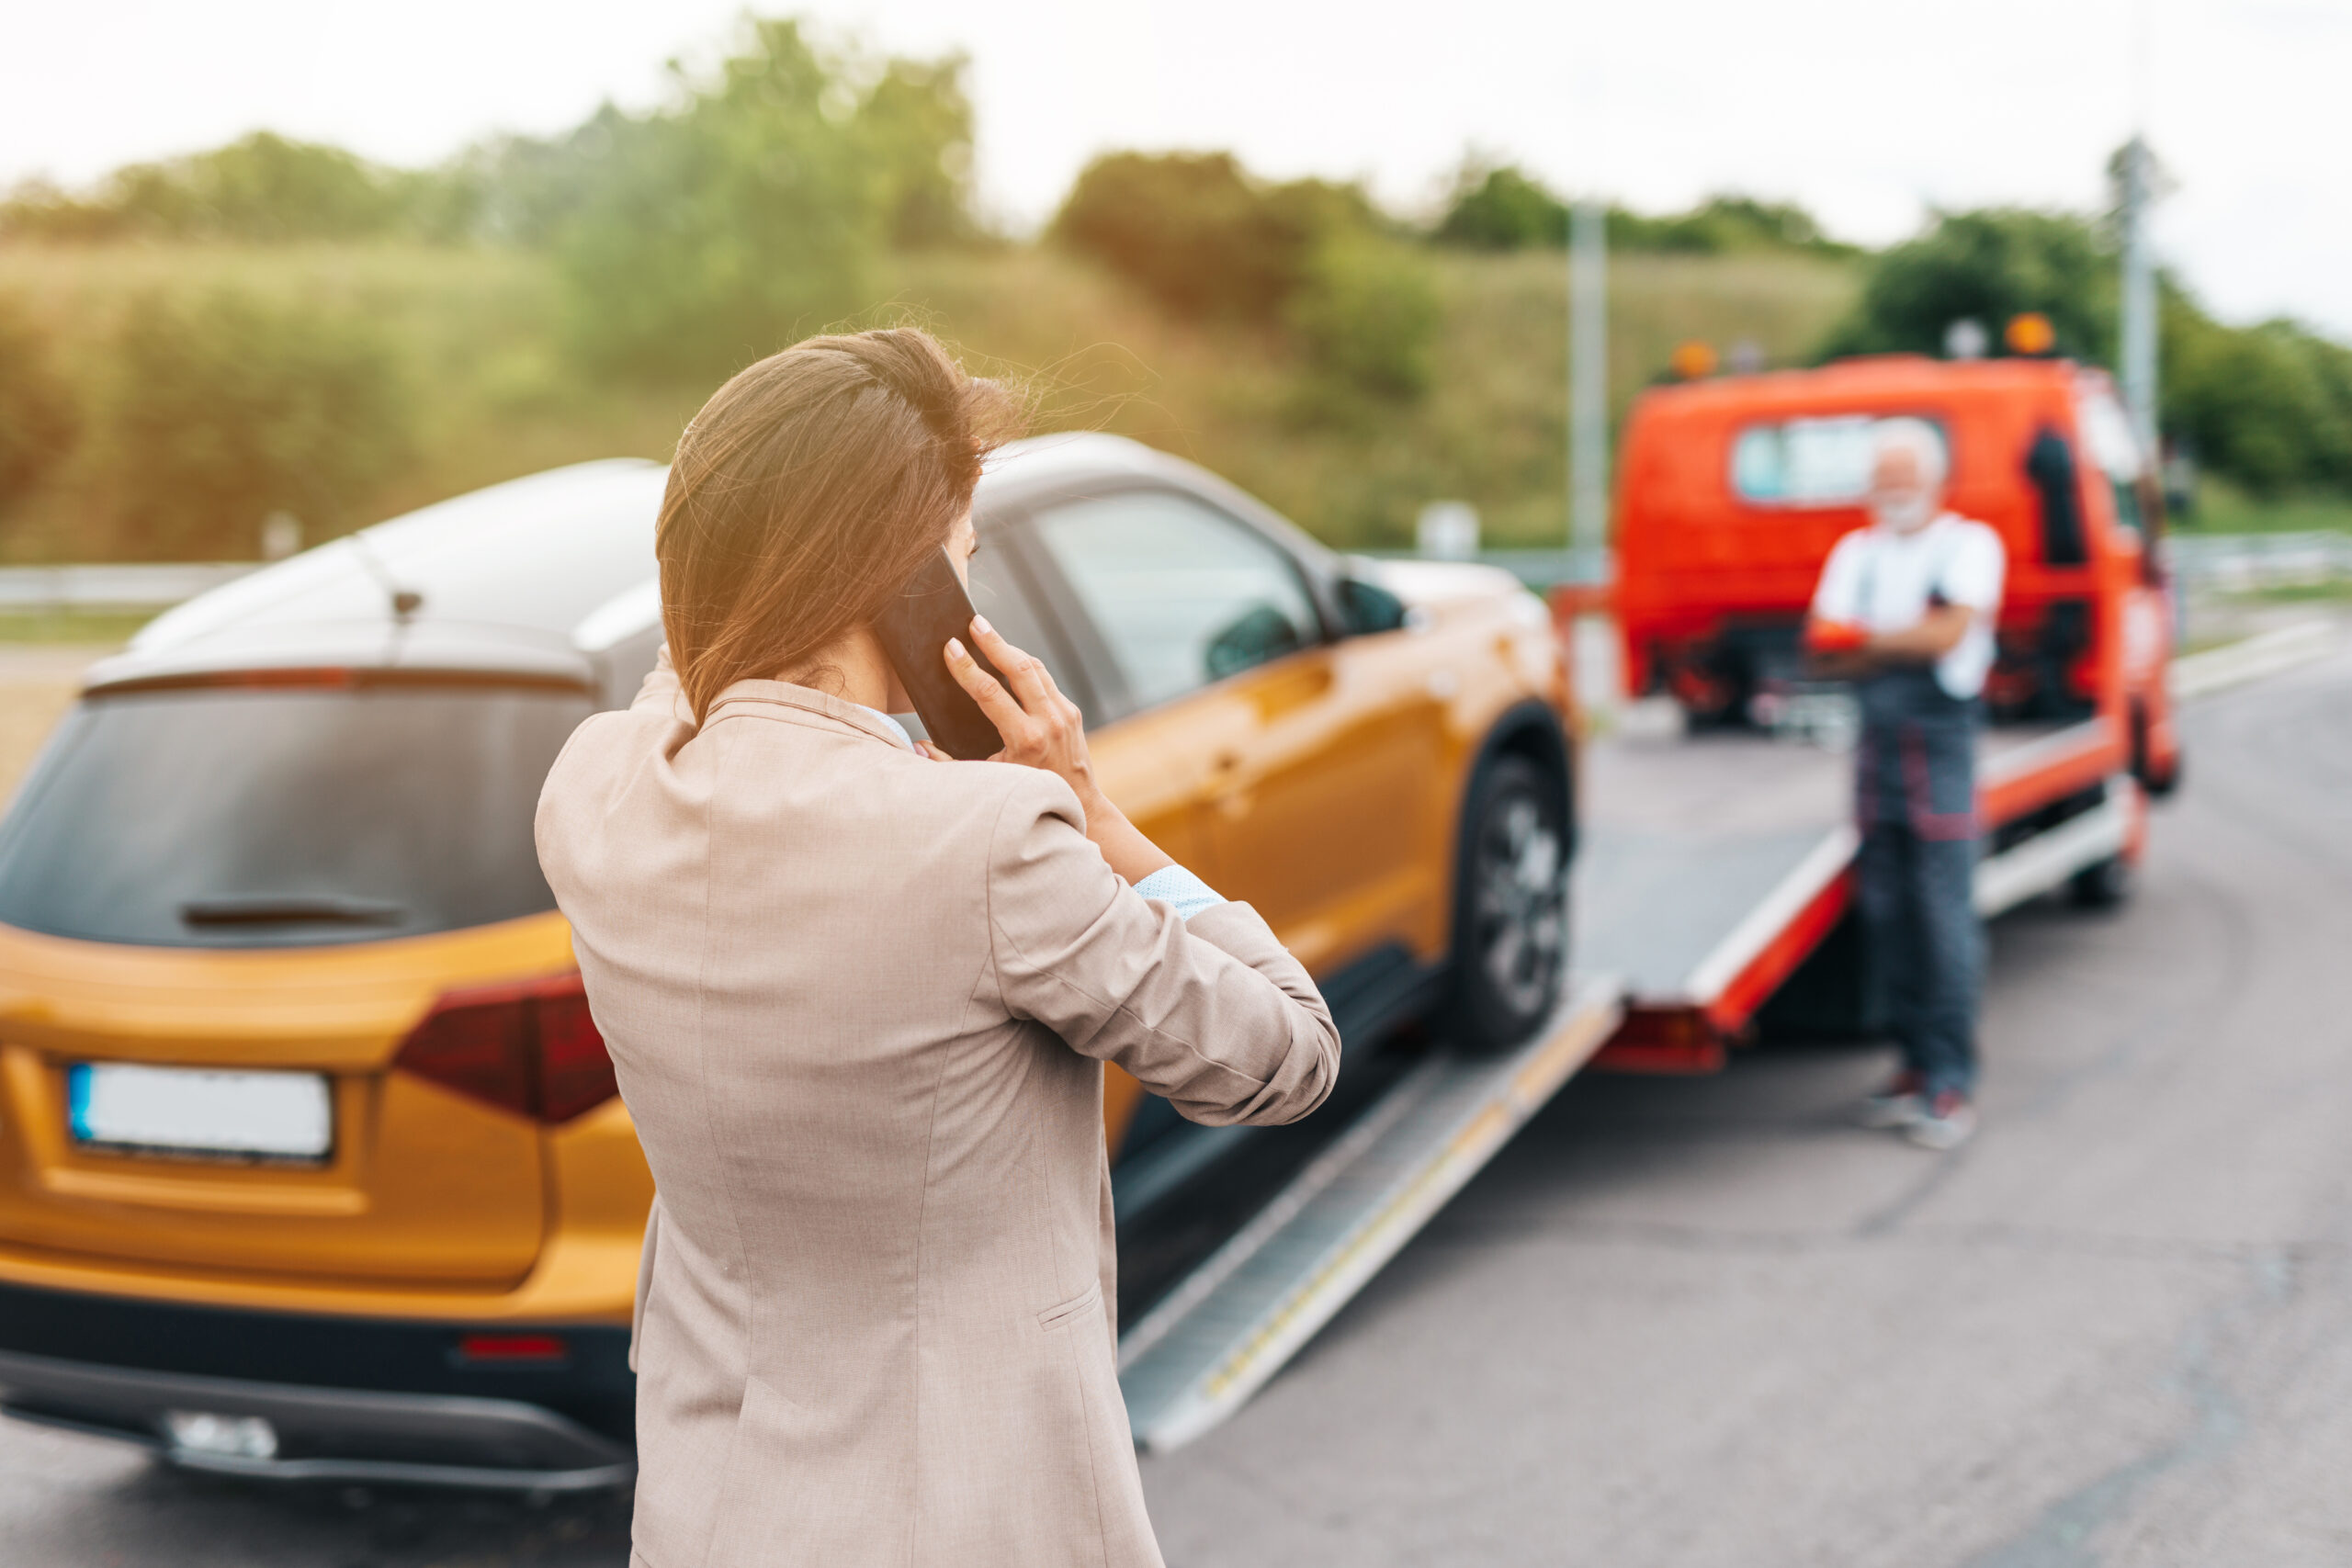 Steps to Take Following a Highway Accident